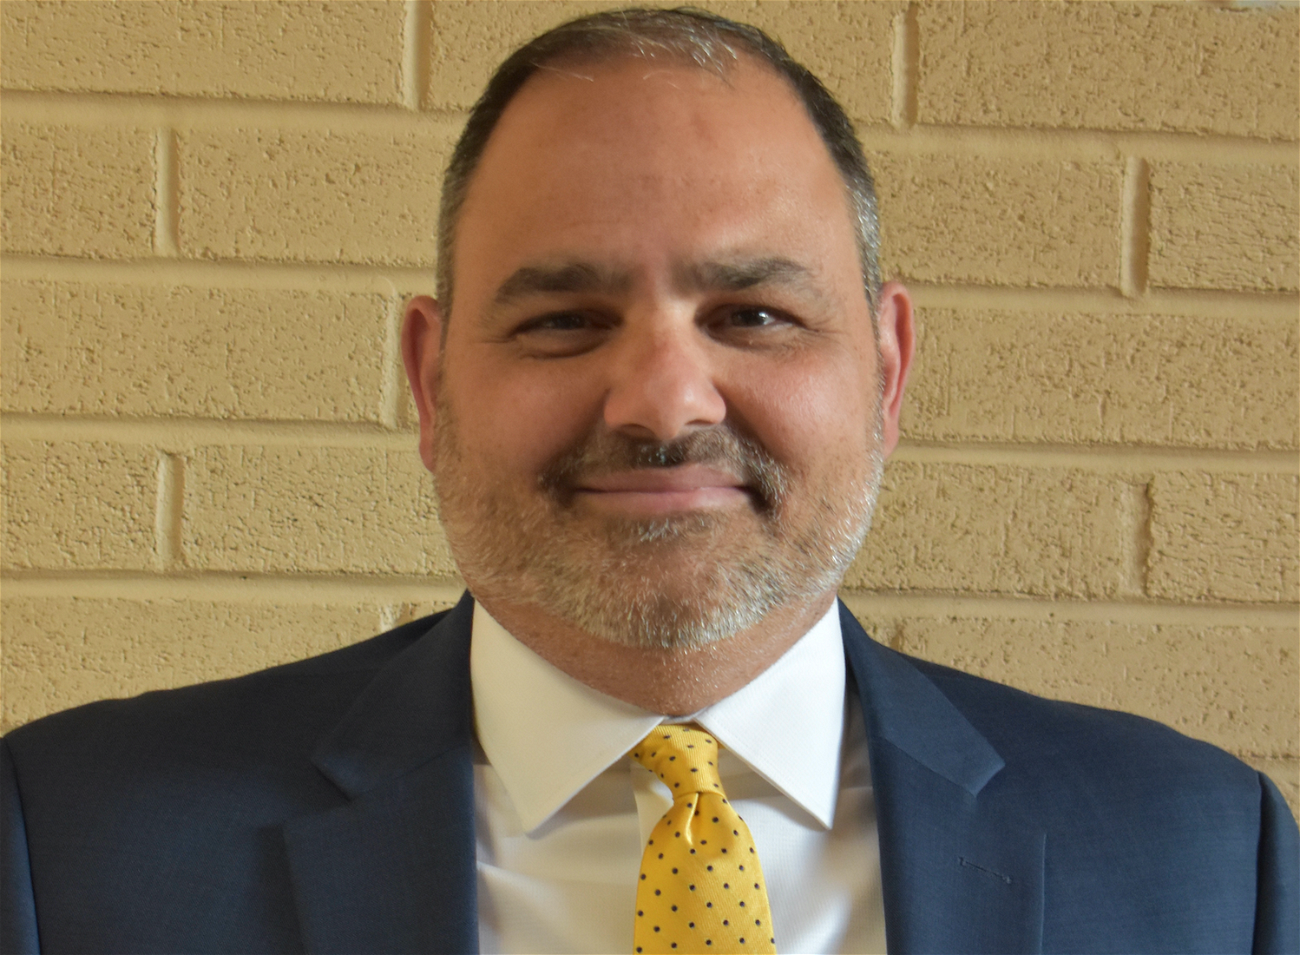 Anthony Davidson, new assistant superintendent for human resources. Photo courtesy of the Northport-East Northport Union Free School District.